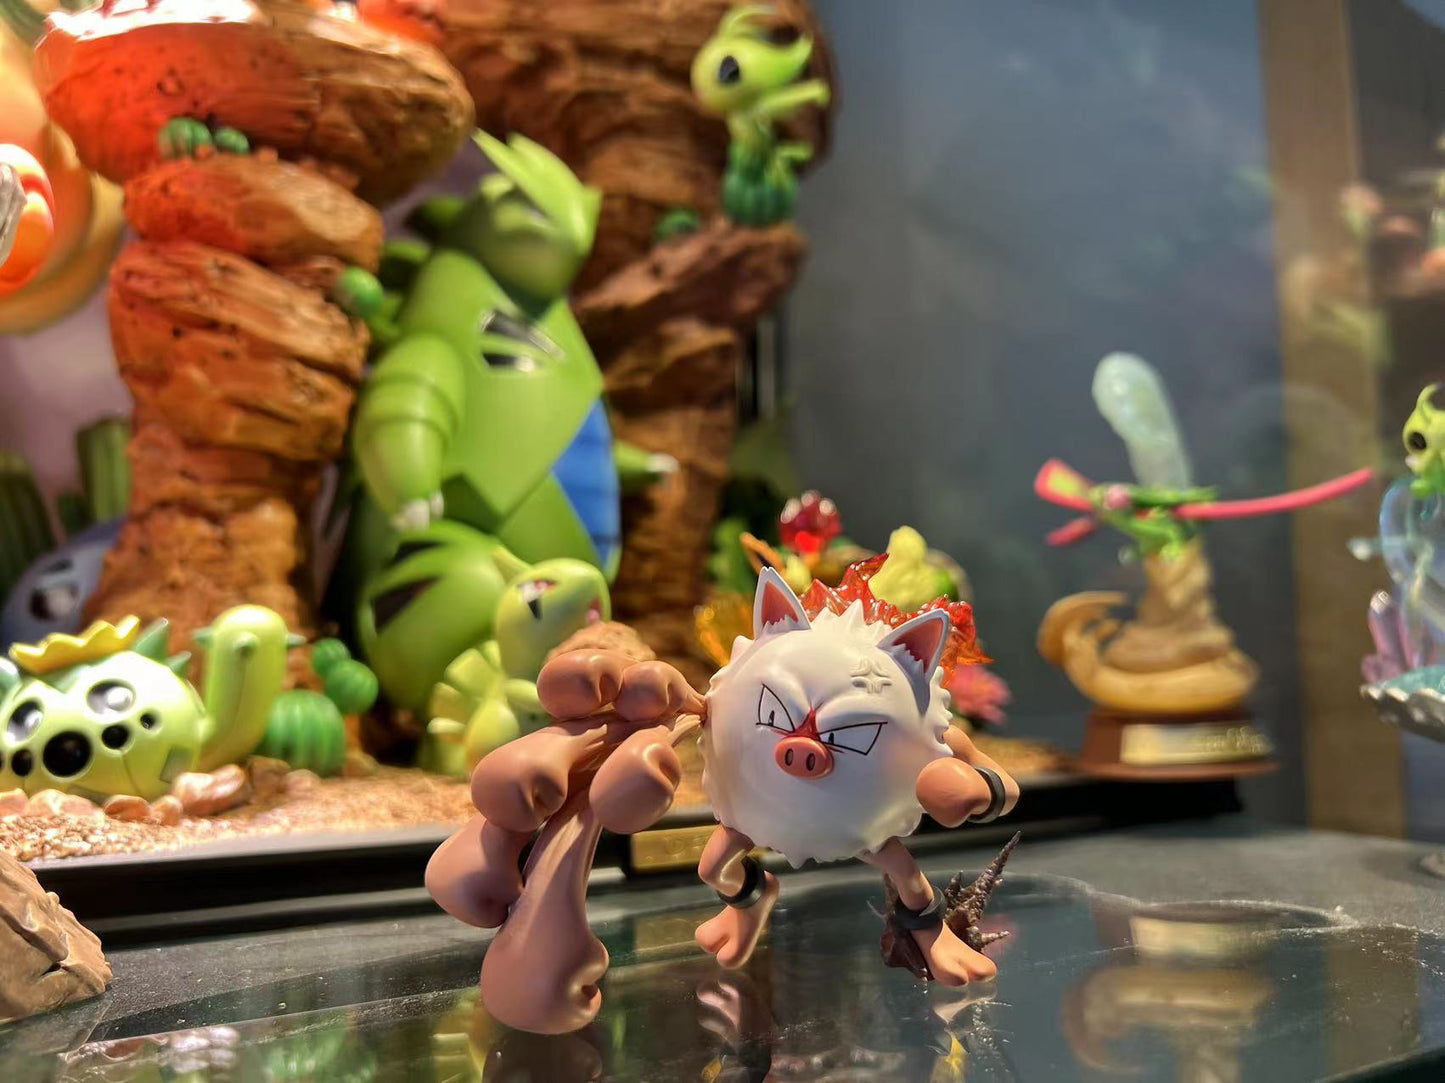 〖Sold Out〗Pokémon Peripheral Products Primeape - Andy Studio